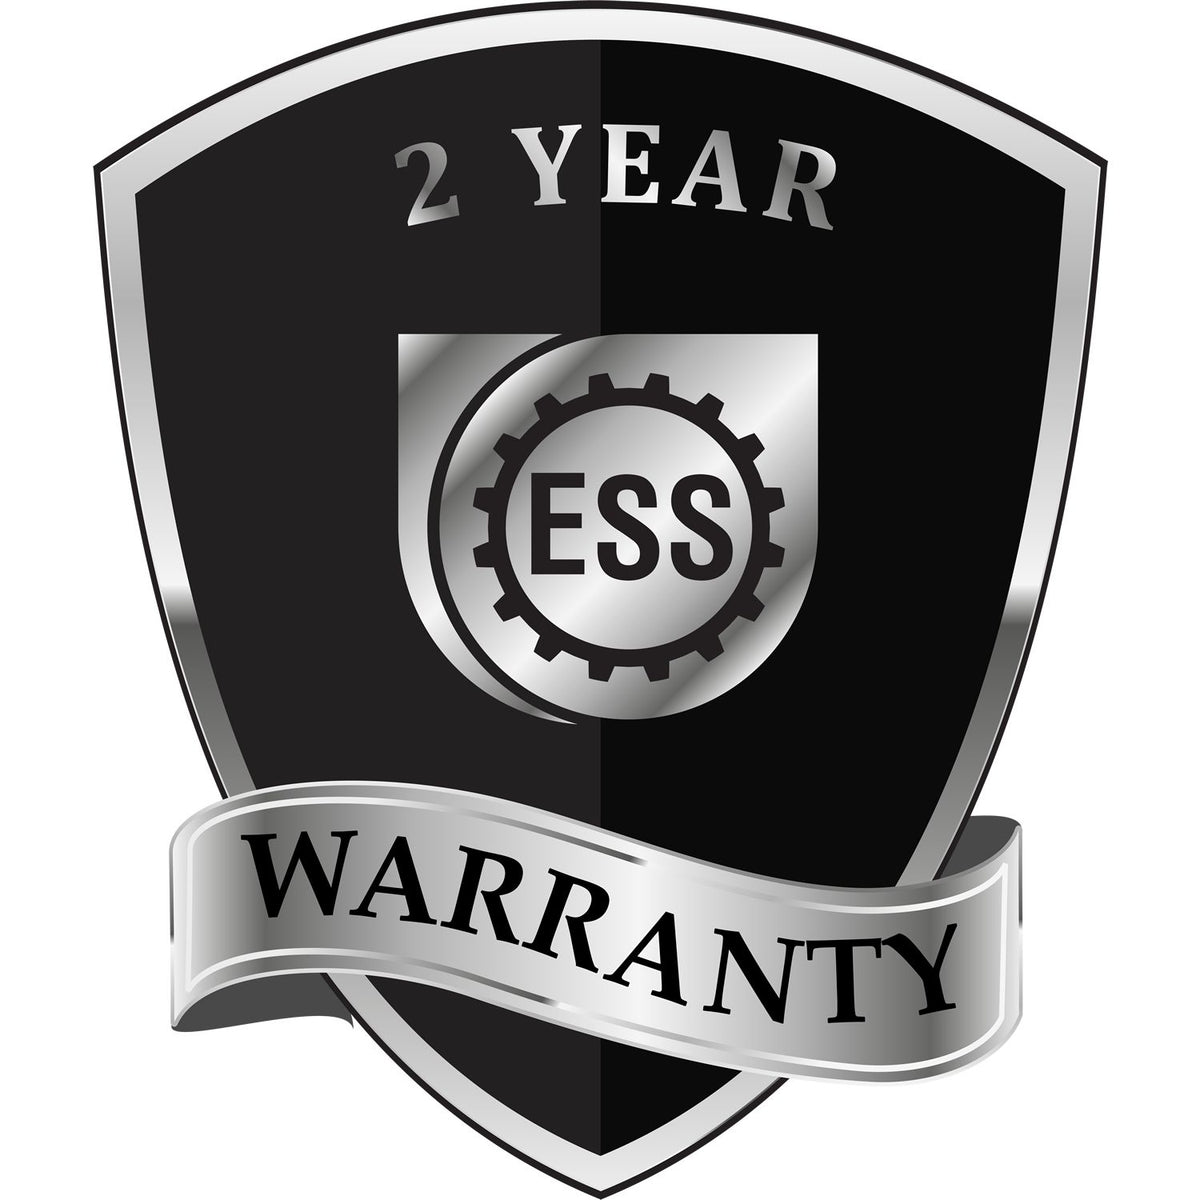 A badge or emblem showing a warranty icon for the Heavy Duty Cast Iron New York Architect Embosser